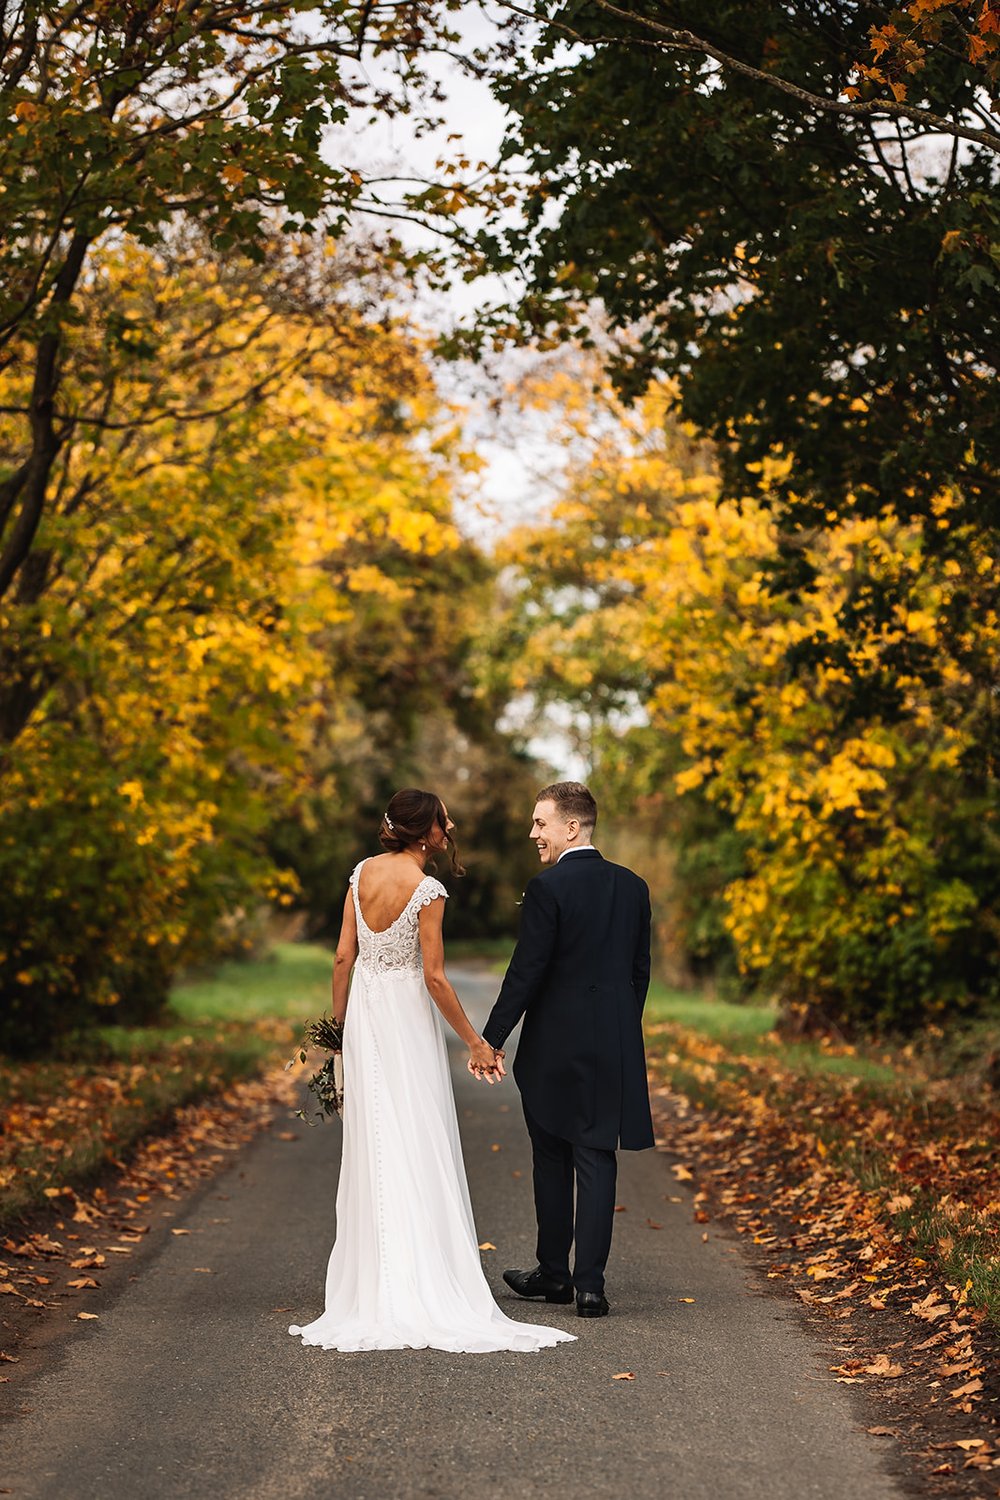 22_Bride and Groom stroll outside the venue amidst autumn leaves Photo by Lumiere Photographic.jpg